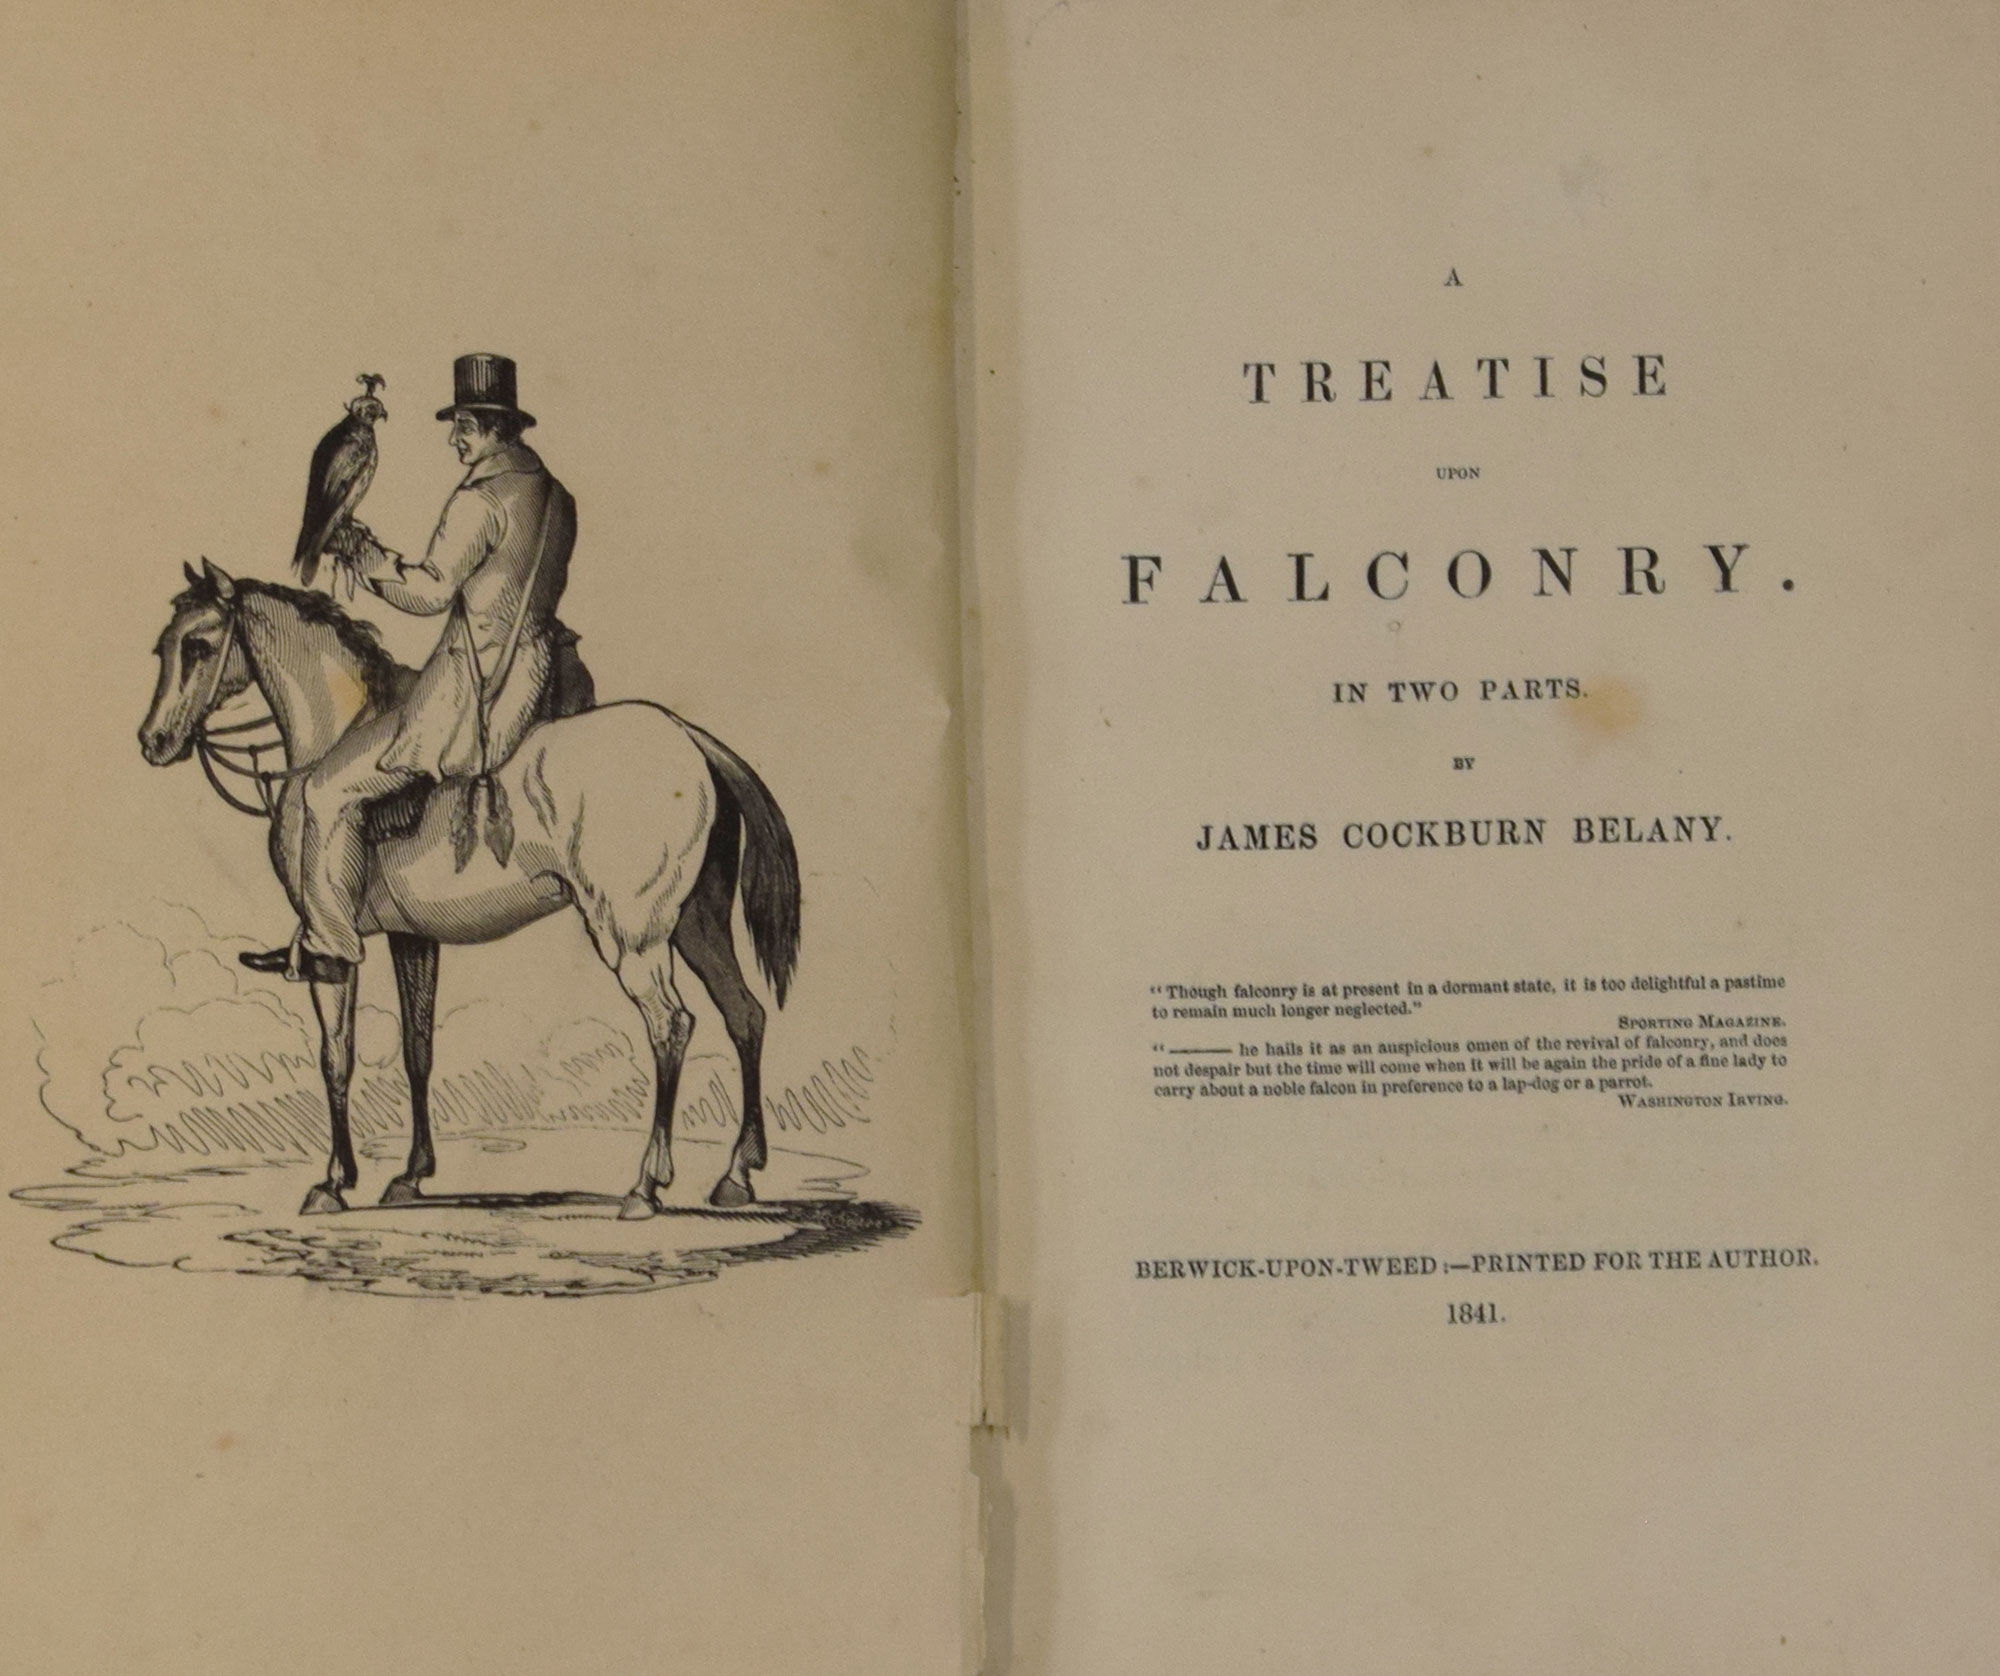 A Treatise upon Falconry in two parts